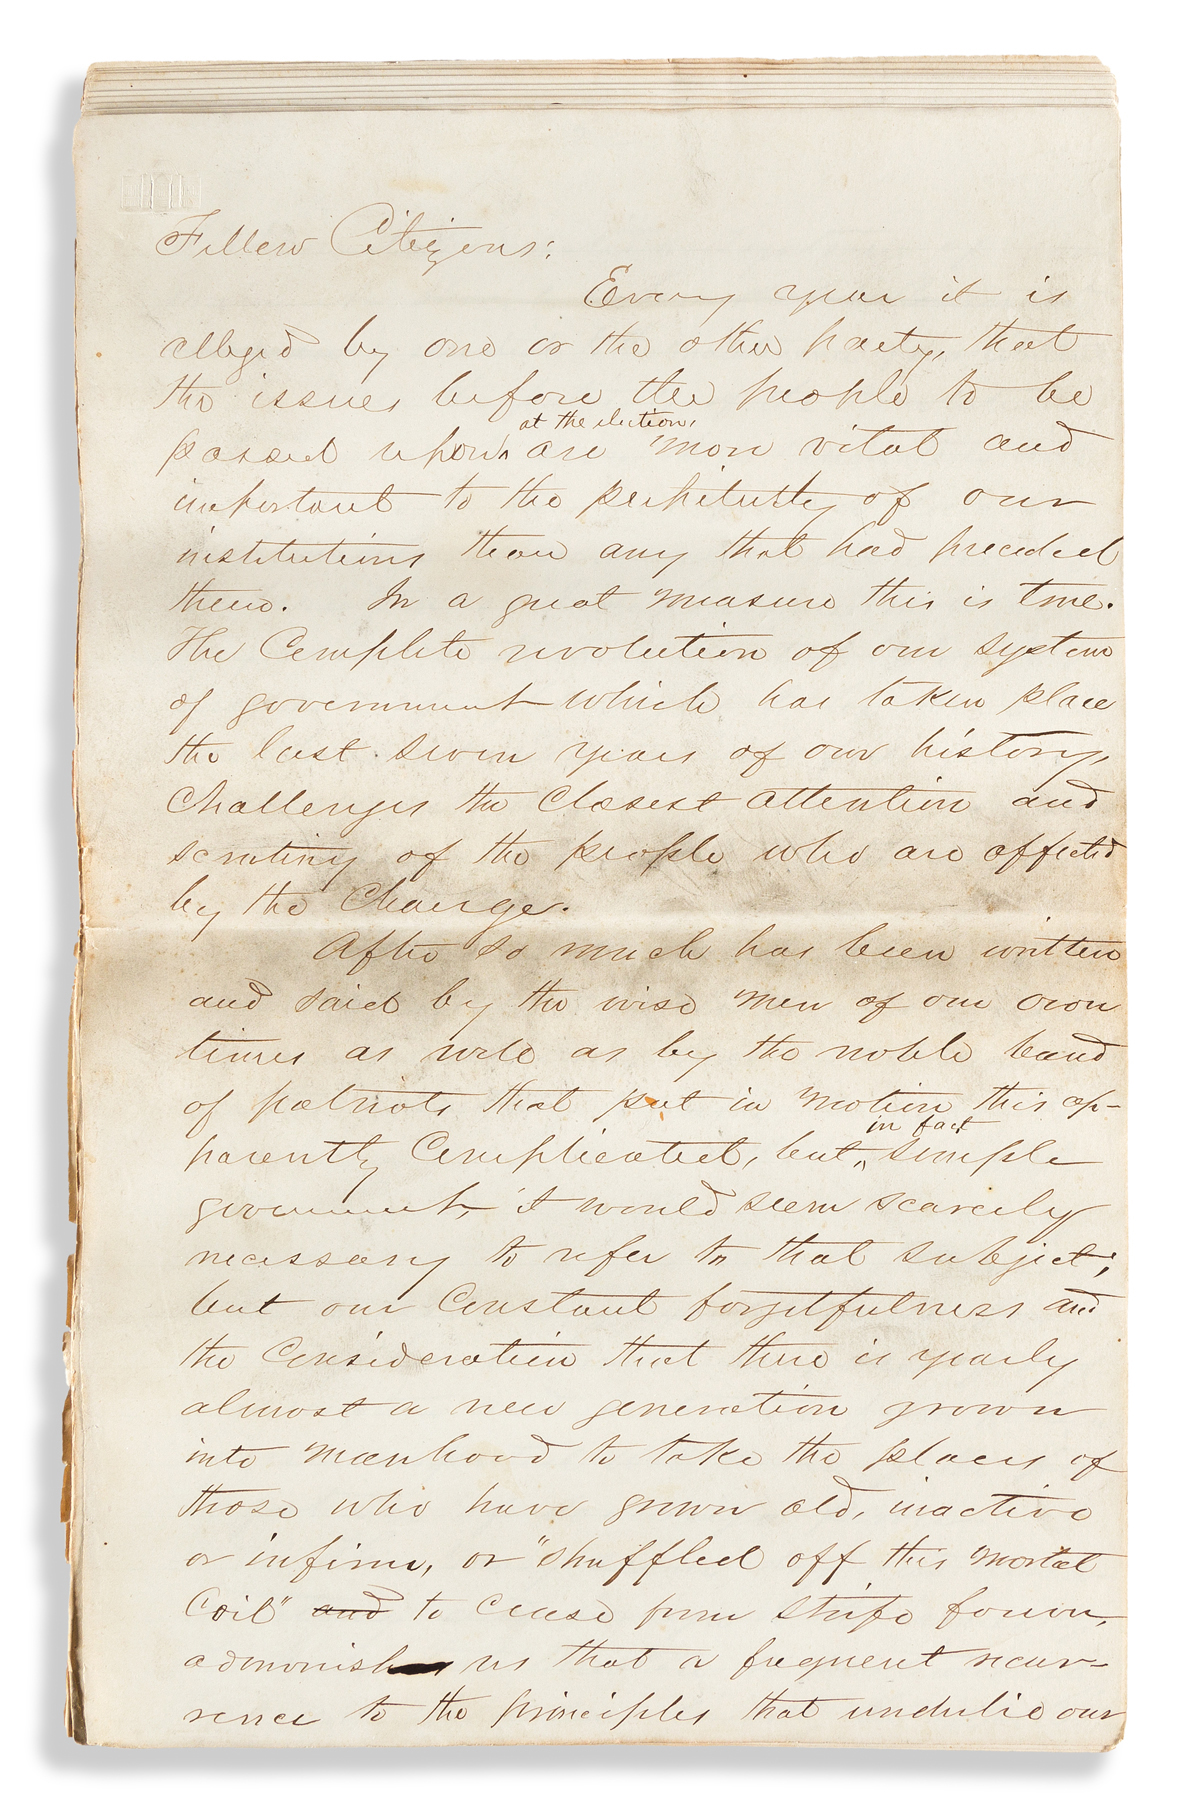 (PRESIDENTS--1868 CAMPAIGN.) Manuscript oration in support of the Democratic Party ticket delivered in rural Ohio.